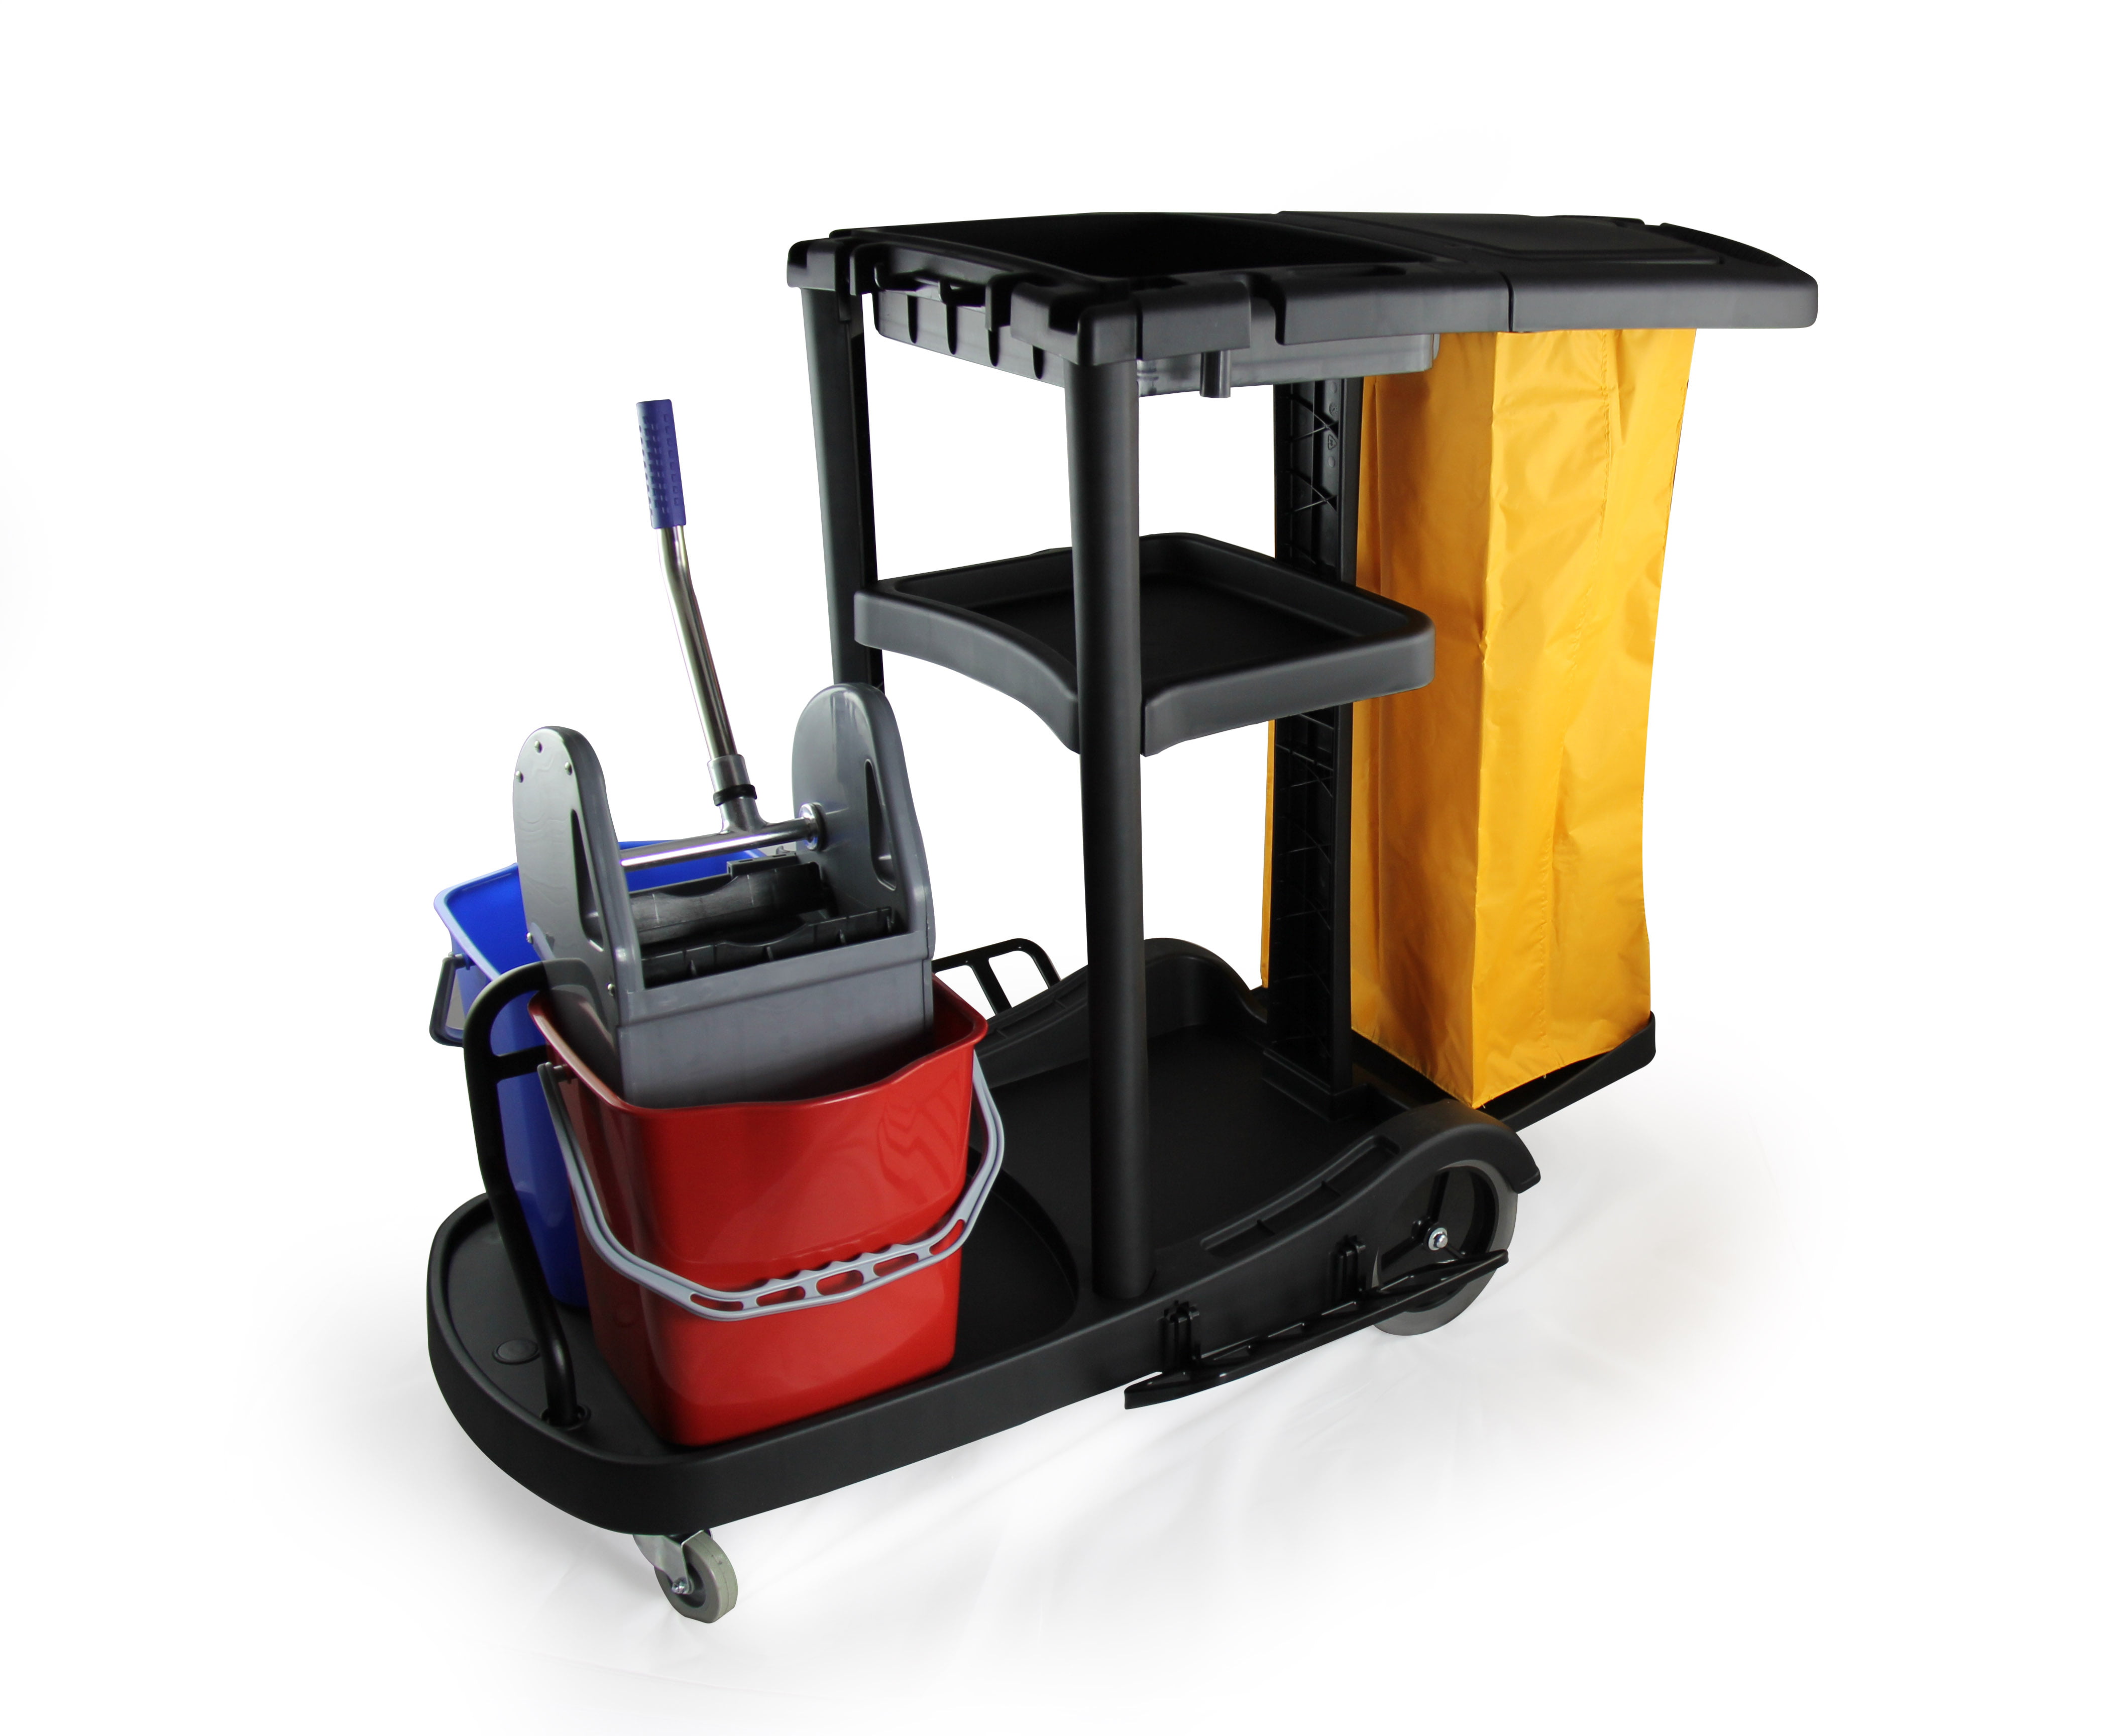 Alpine Lodging Hotel/Housekeeping Cleaning Carts #463 - The Vacuum Factory